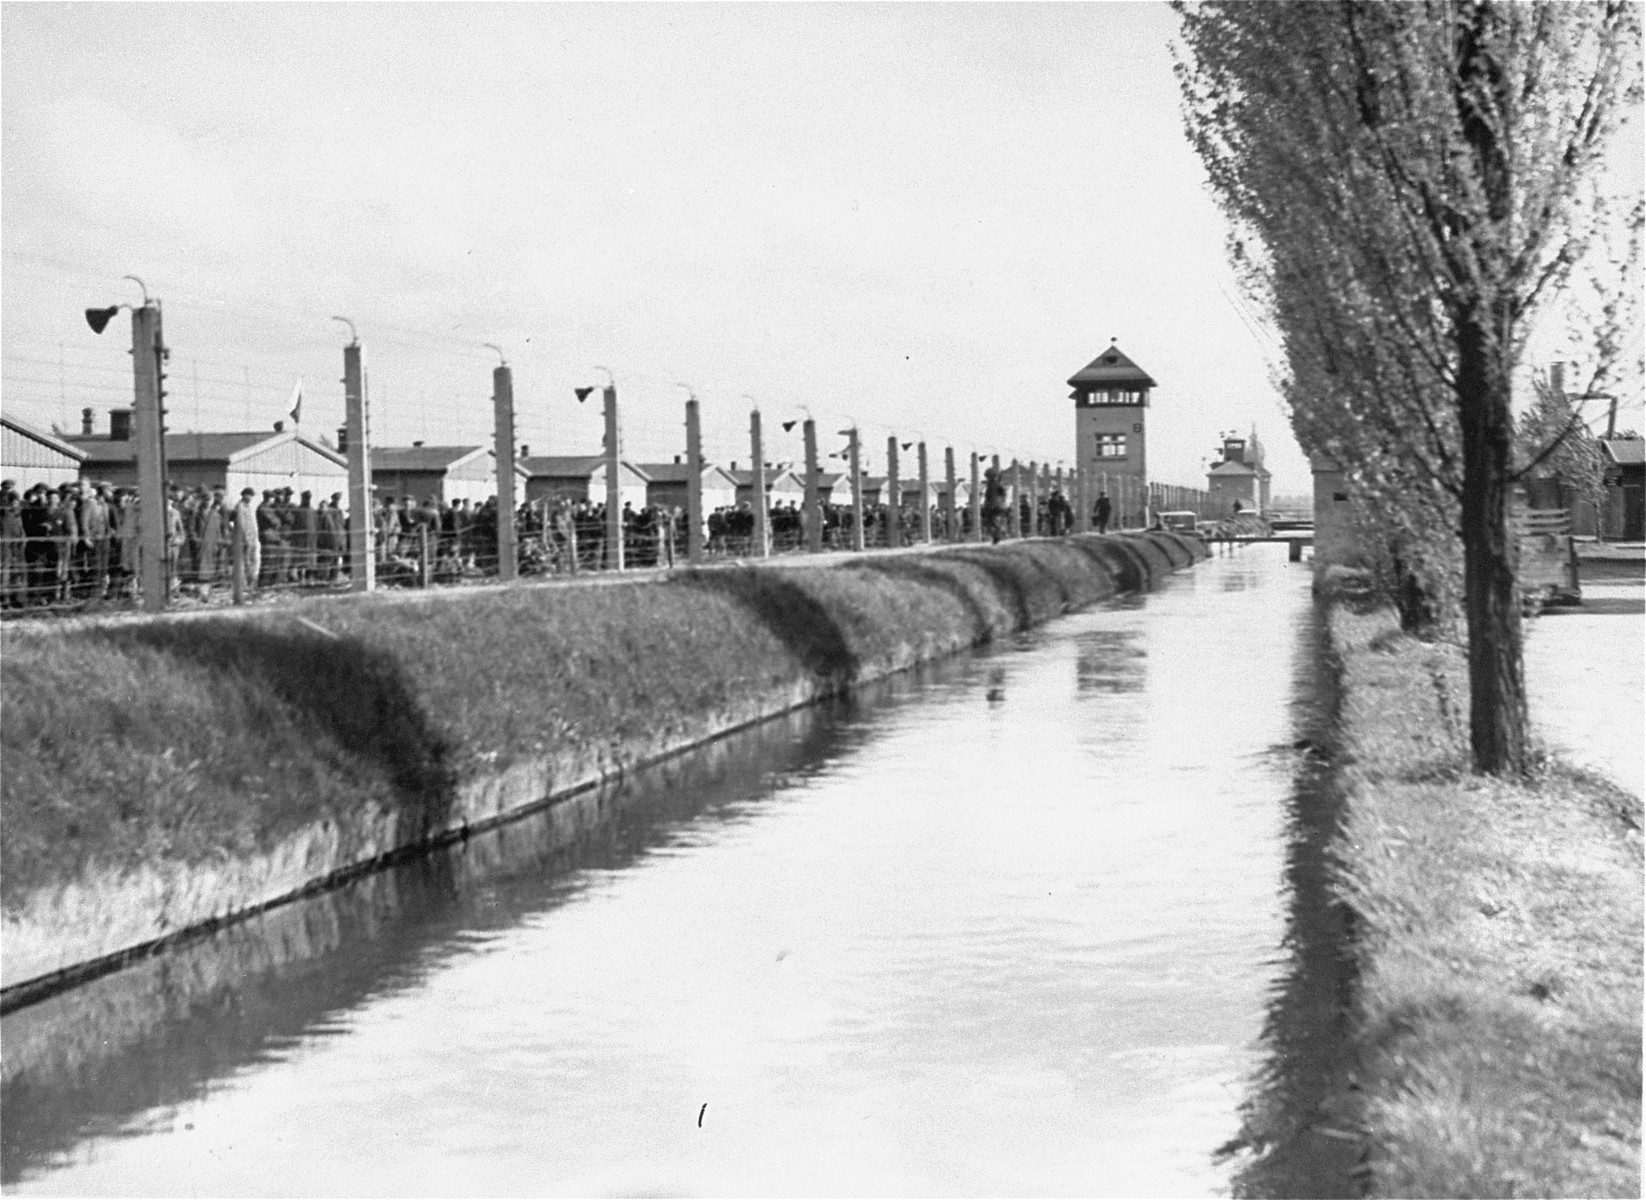 A watch tower and section of the electrified fence in Dachau